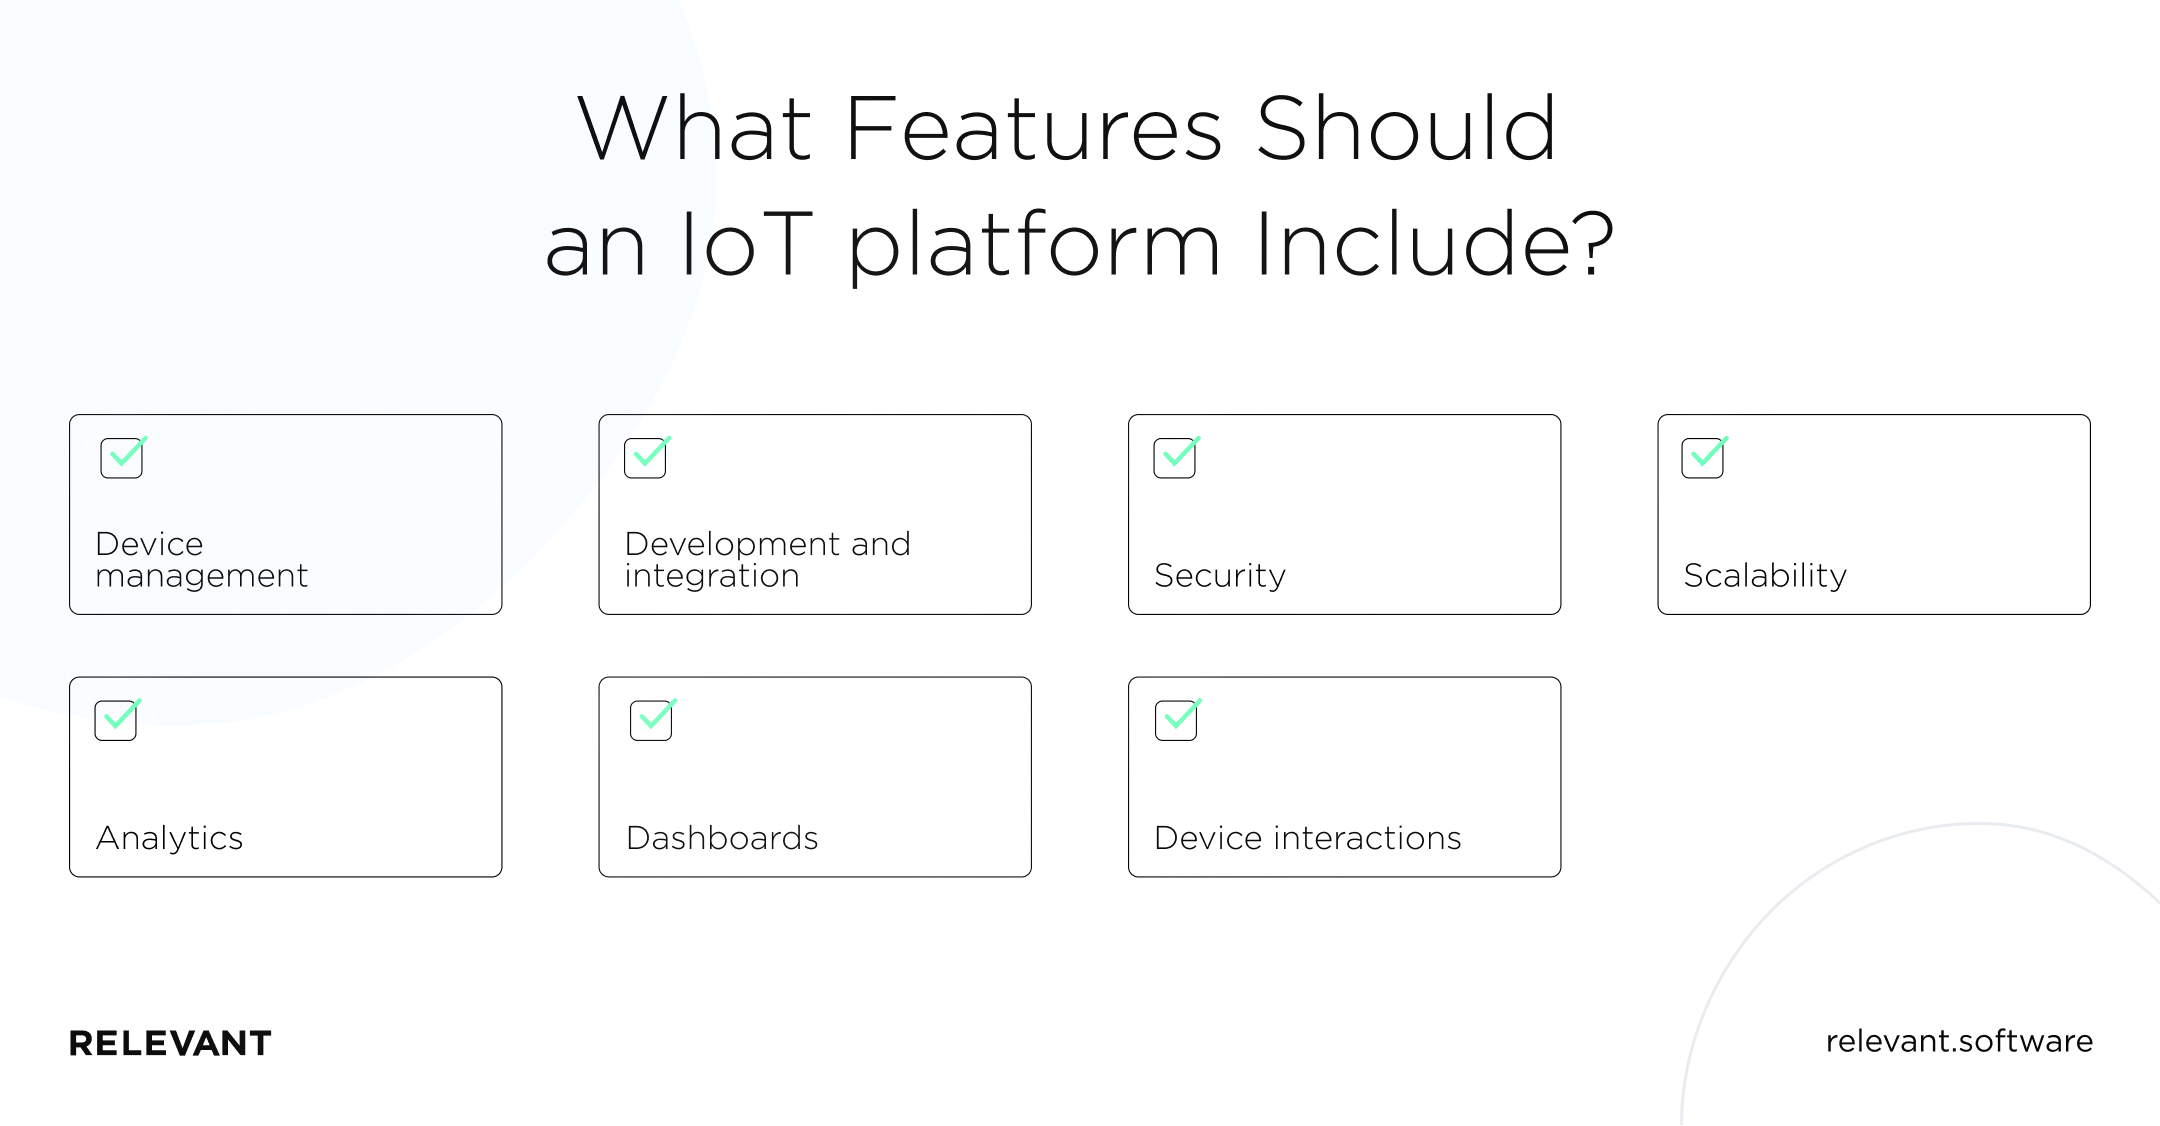 Features an IoT platform Should Include